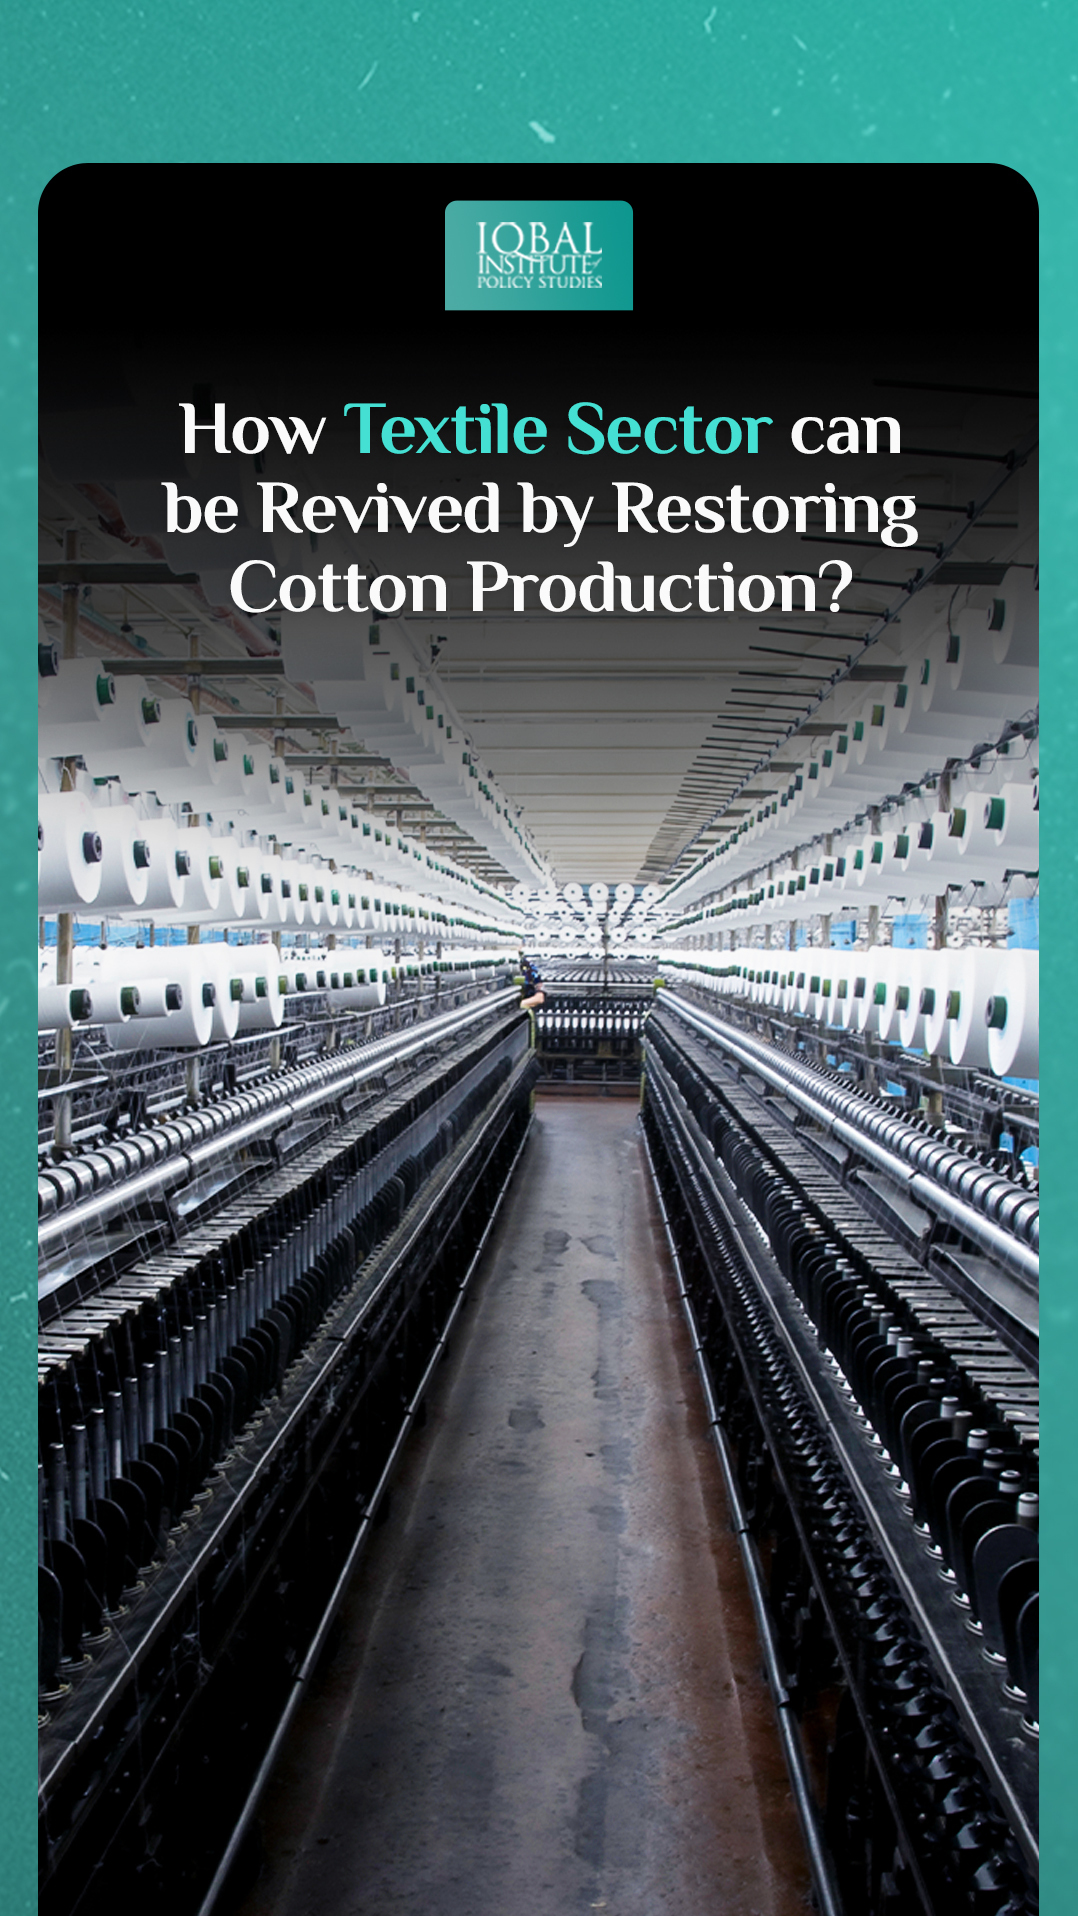 How can the Textile Sector be Revived by Restoring Cotton Production?